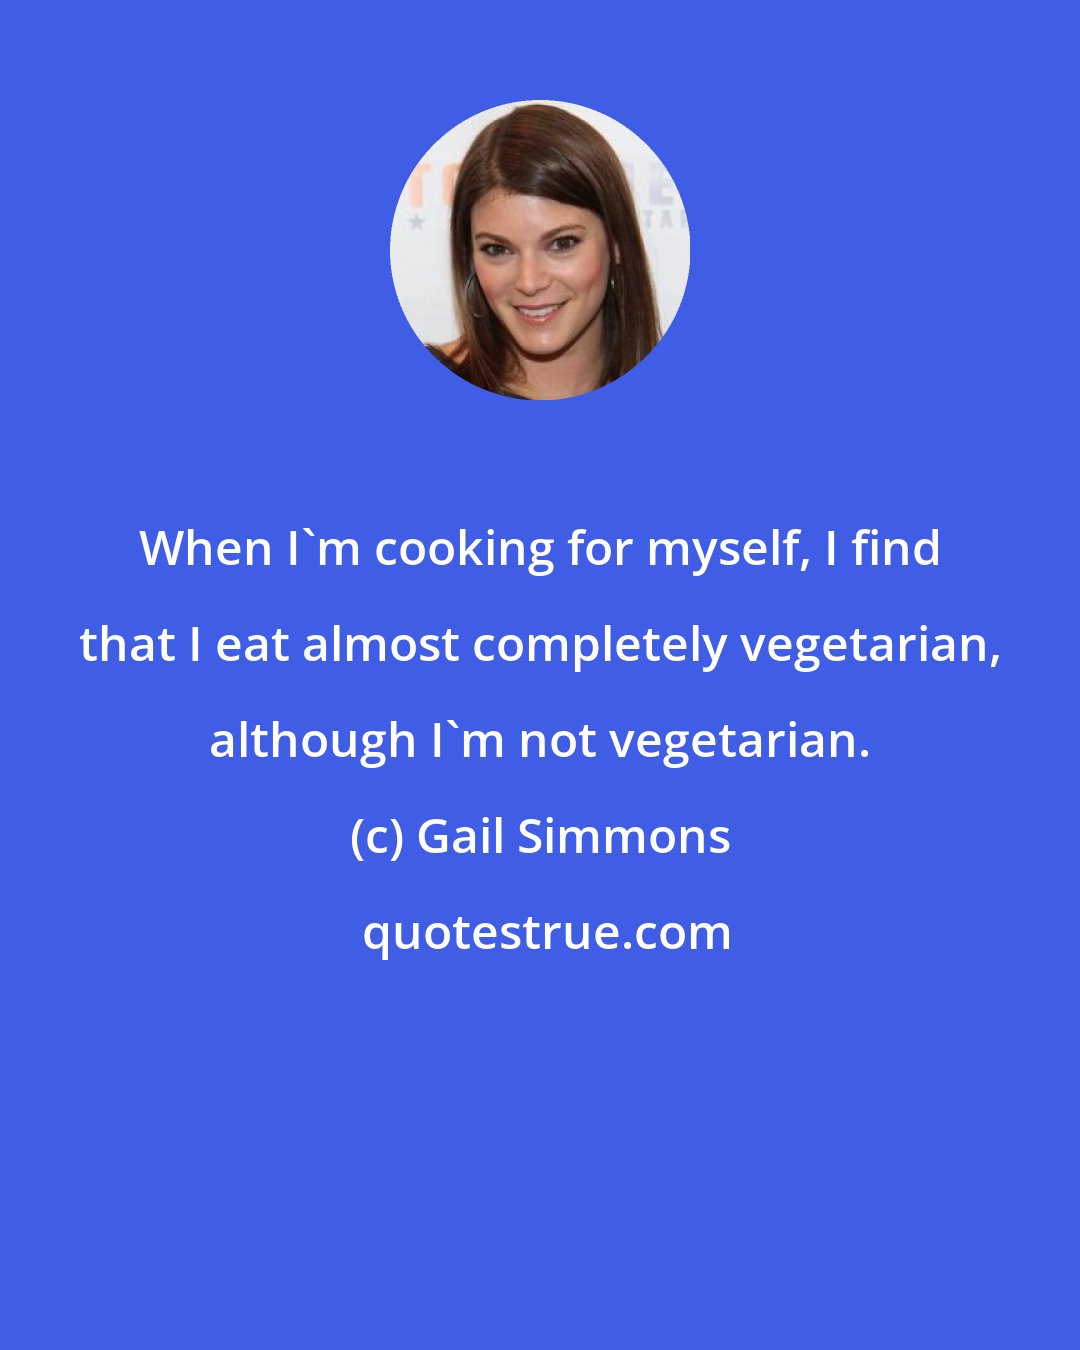 Gail Simmons: When I'm cooking for myself, I find that I eat almost completely vegetarian, although I'm not vegetarian.